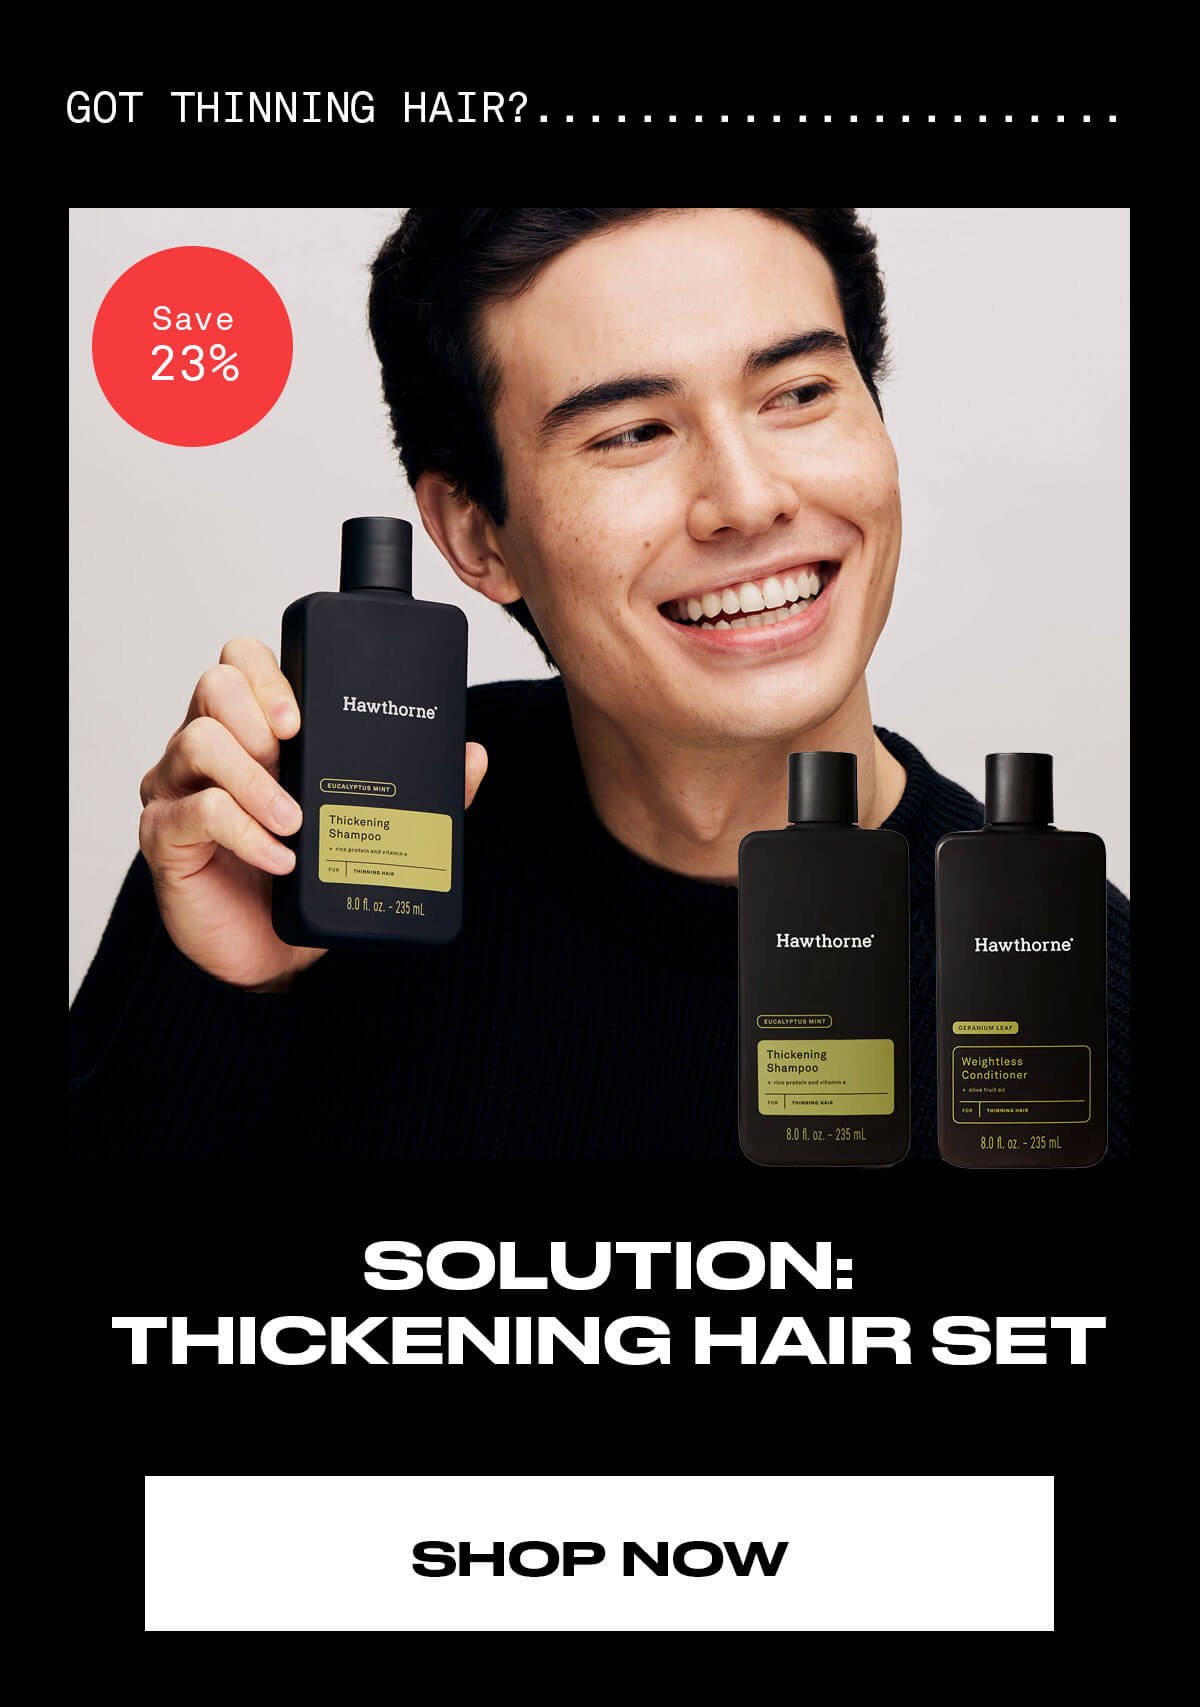 GOT THINKING HAIR?......... SOLUTION: THICKENING HAIR SET SHOP NOW